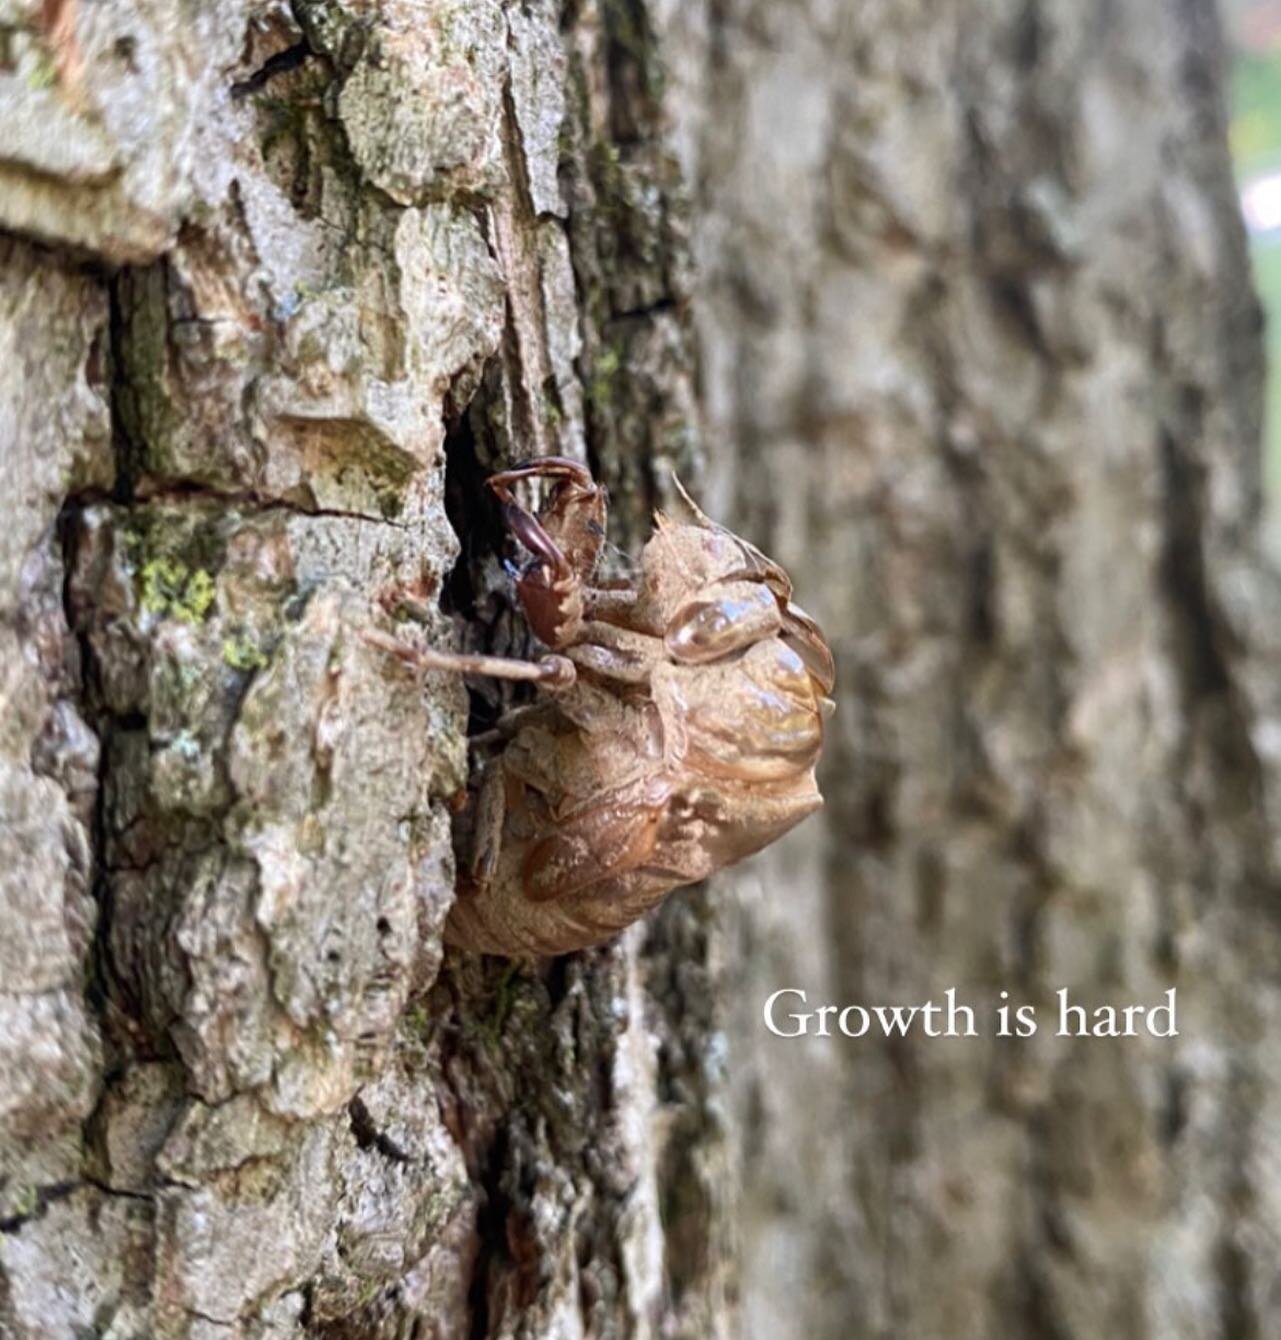 Fun fact, in traditional Chinese medicine, cicada moltings can actually be used medicinally to help with itchy skin rashes and hoarse voice. 

 📸 and in-photo caption credit to @jordyfess ! 

#inspirationalquotes #tcm #herbalmedicine #chinesemedicin